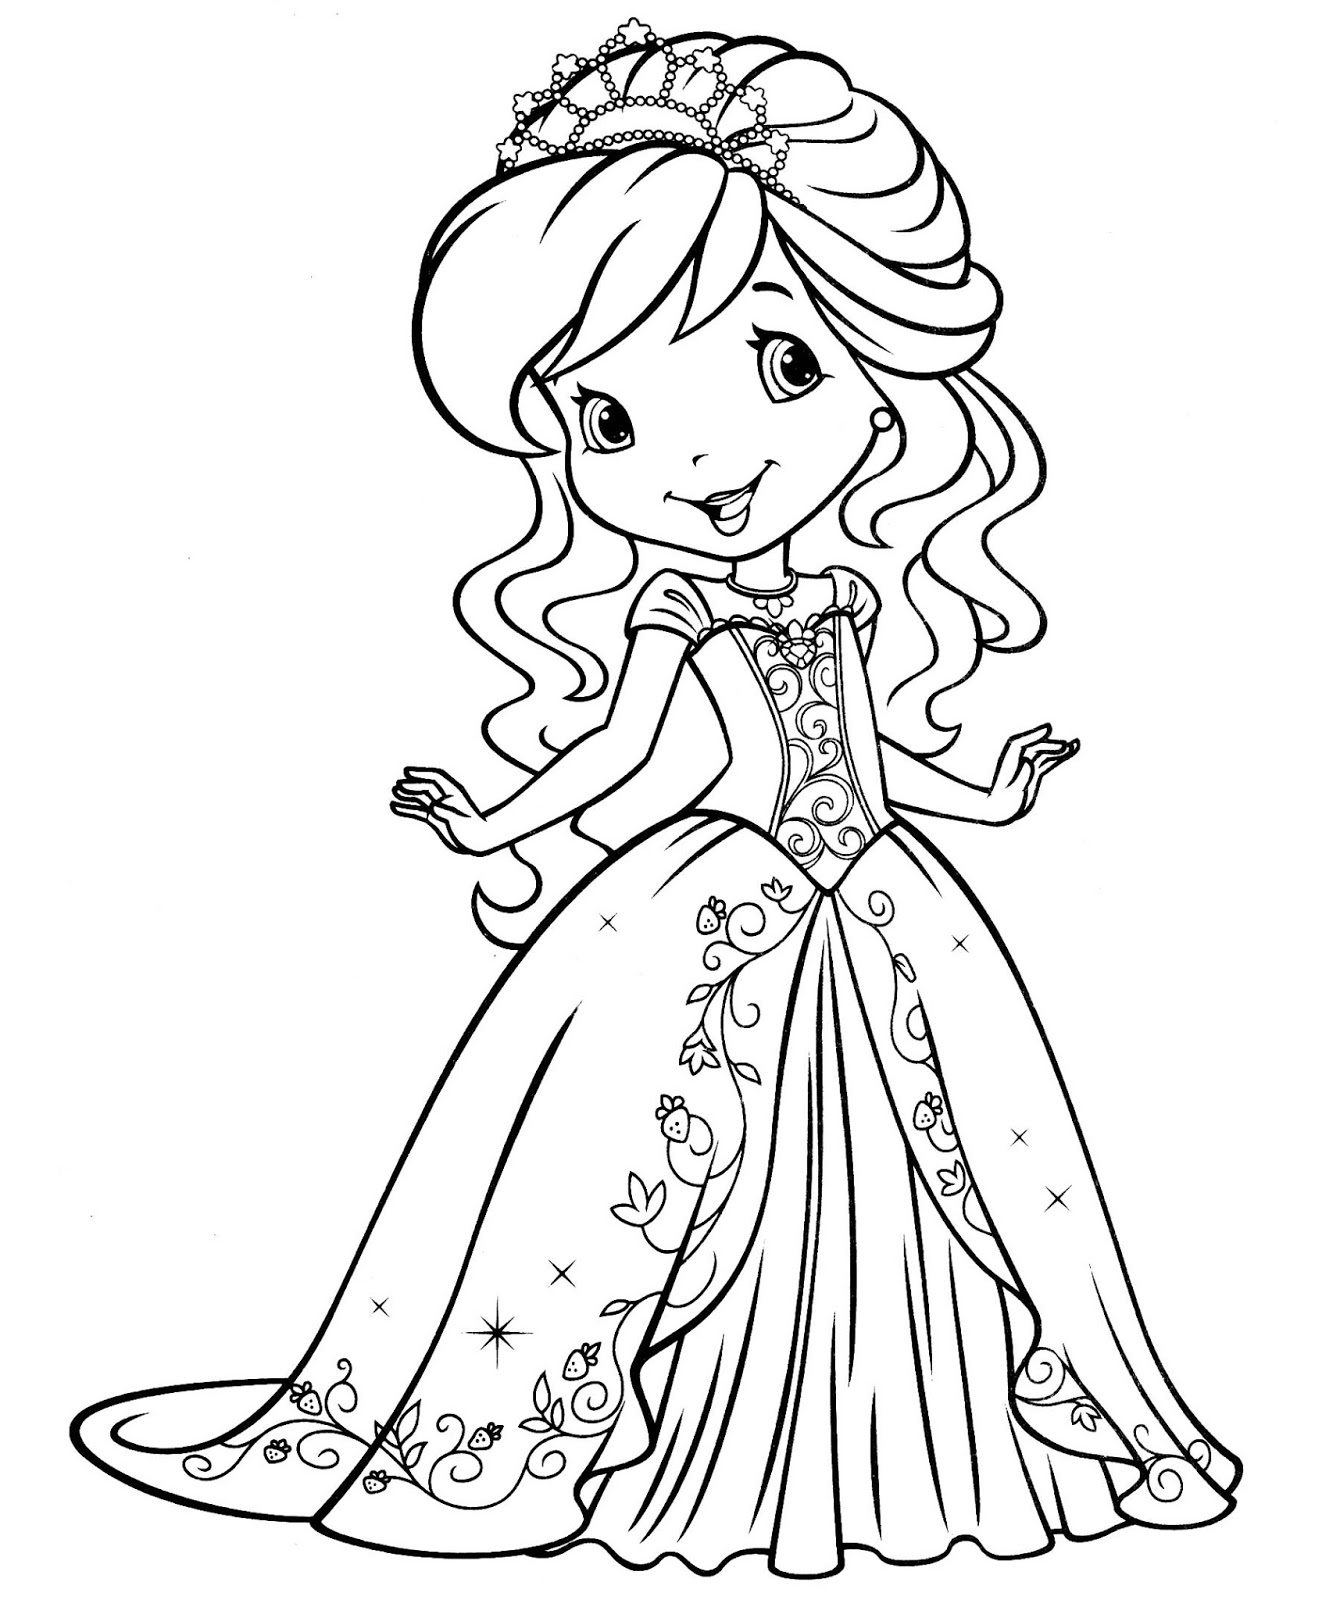 Girl People Coloring Pages at GetColorings.com | Free printable